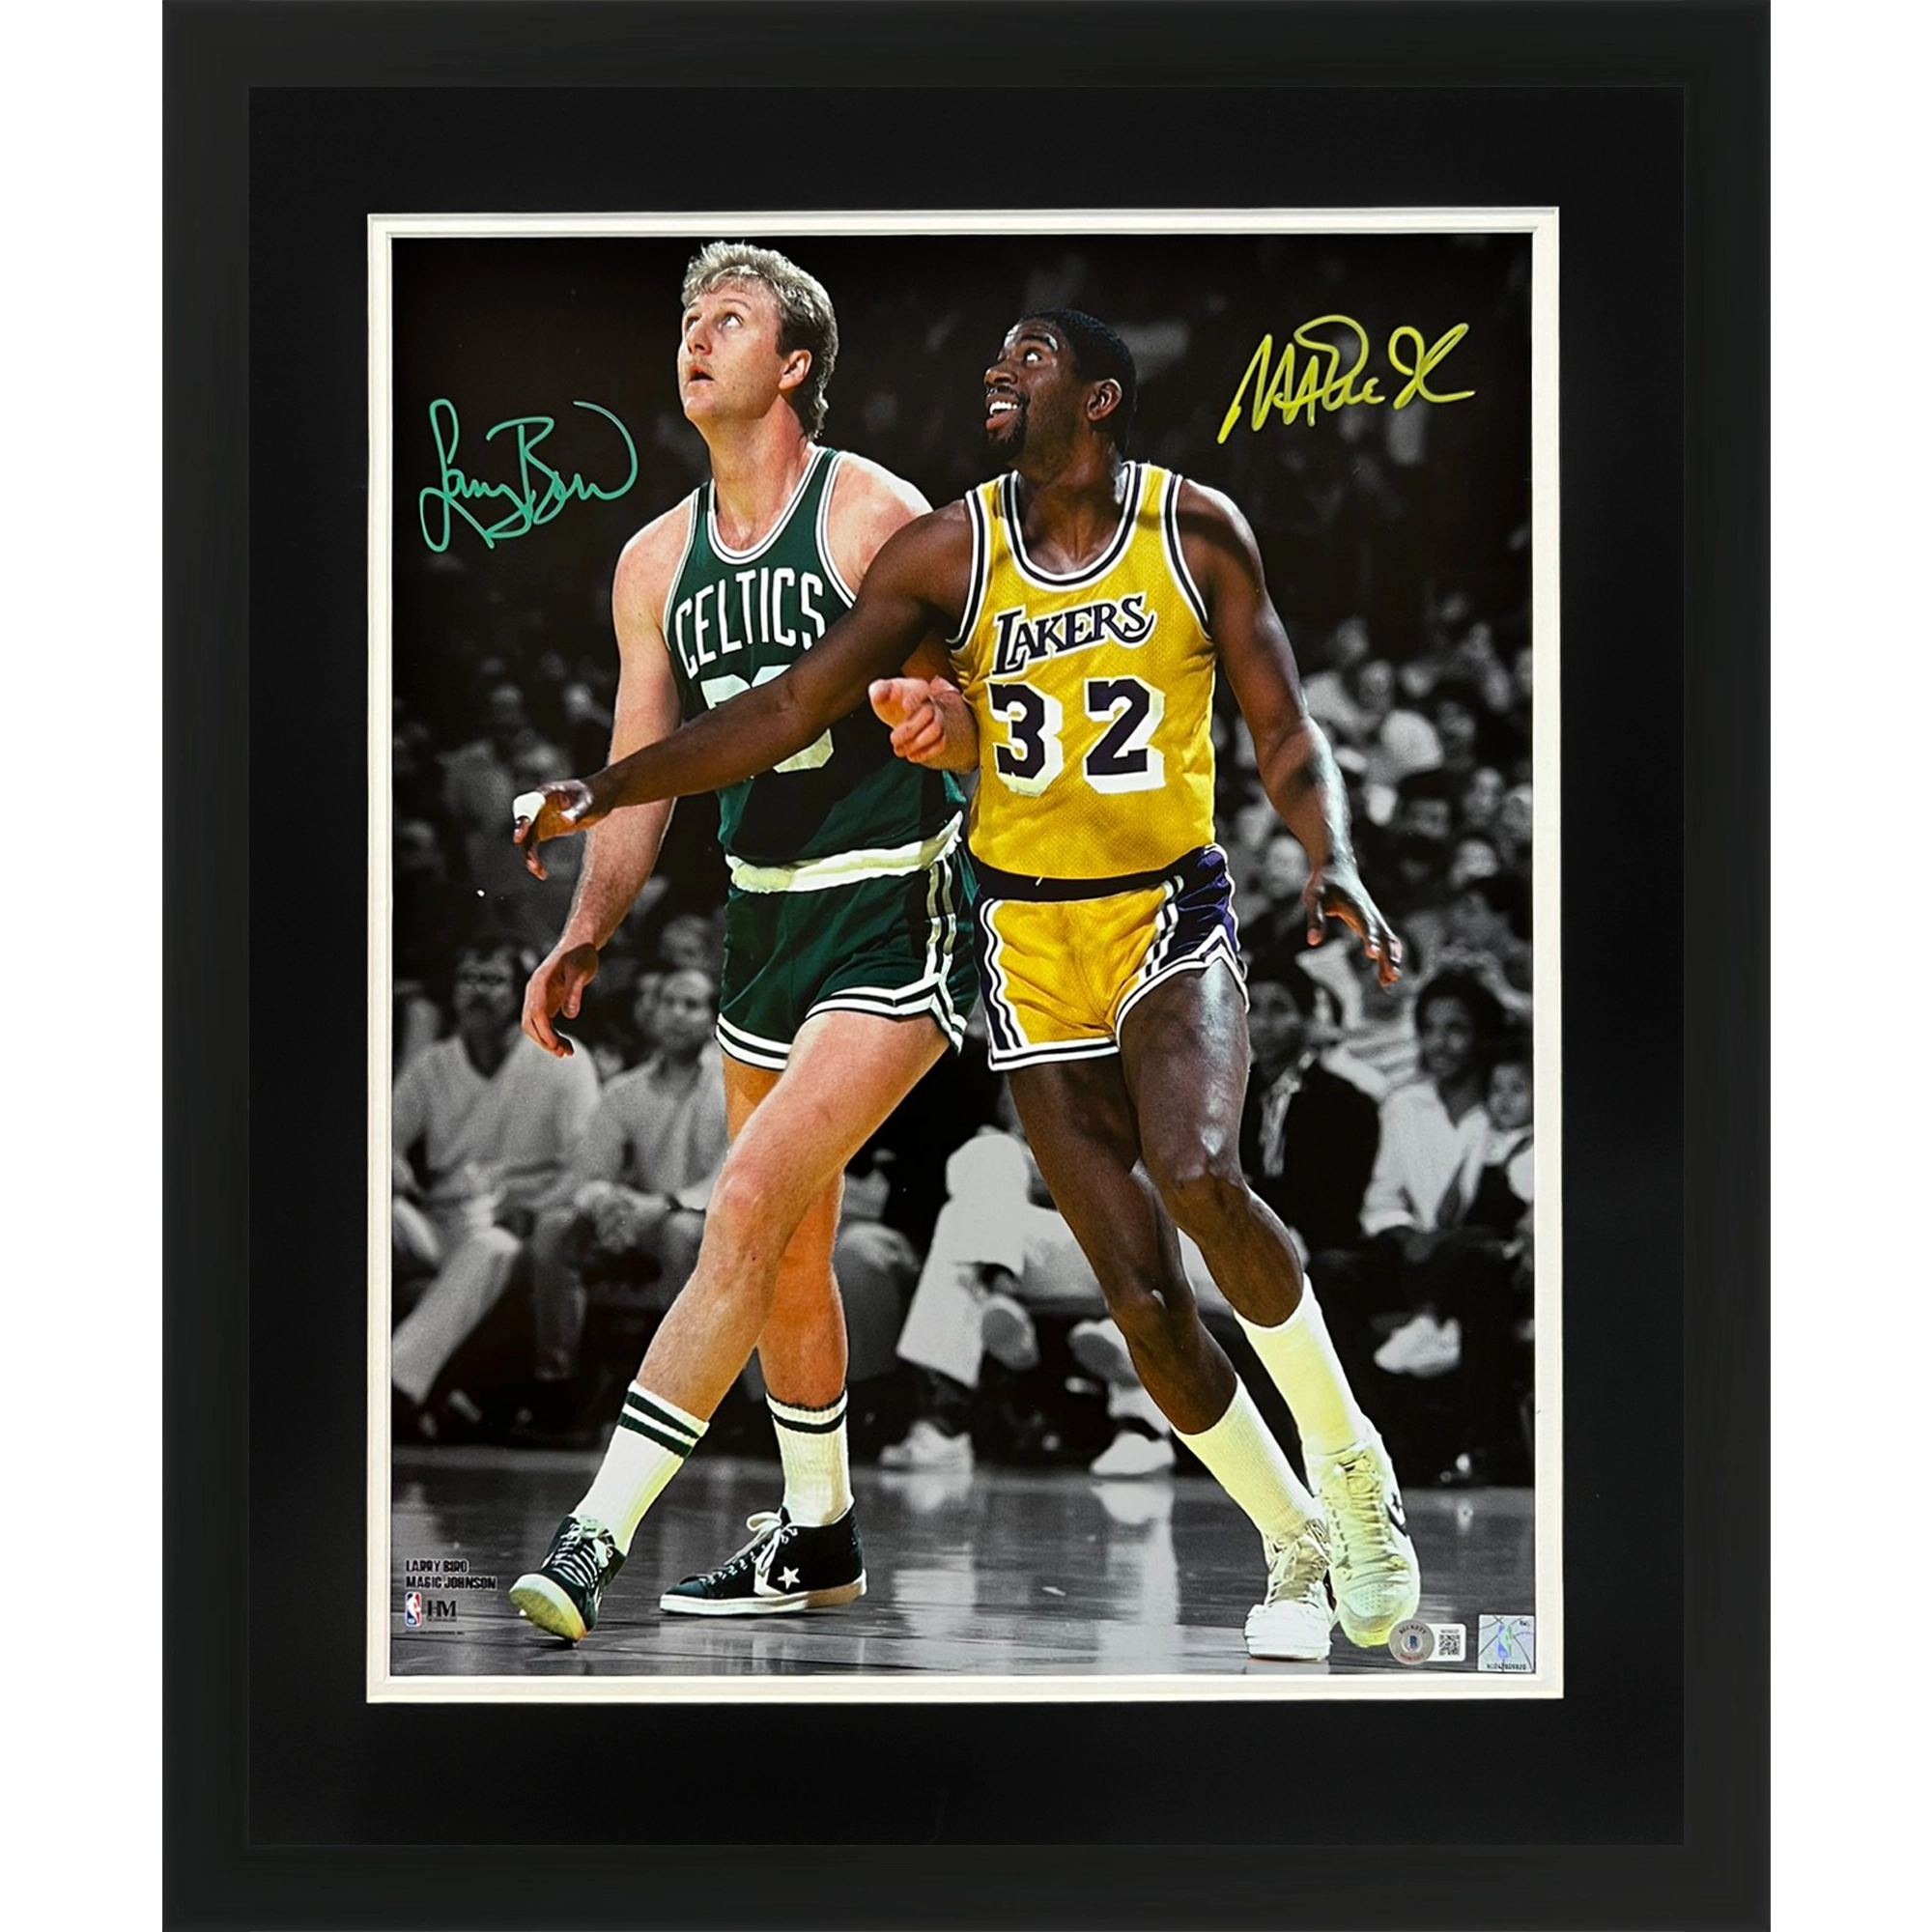 Larry Bird and Magic Johnson Dual Autographed Deluxe Framed 16x20 Photo - Beckett Witness